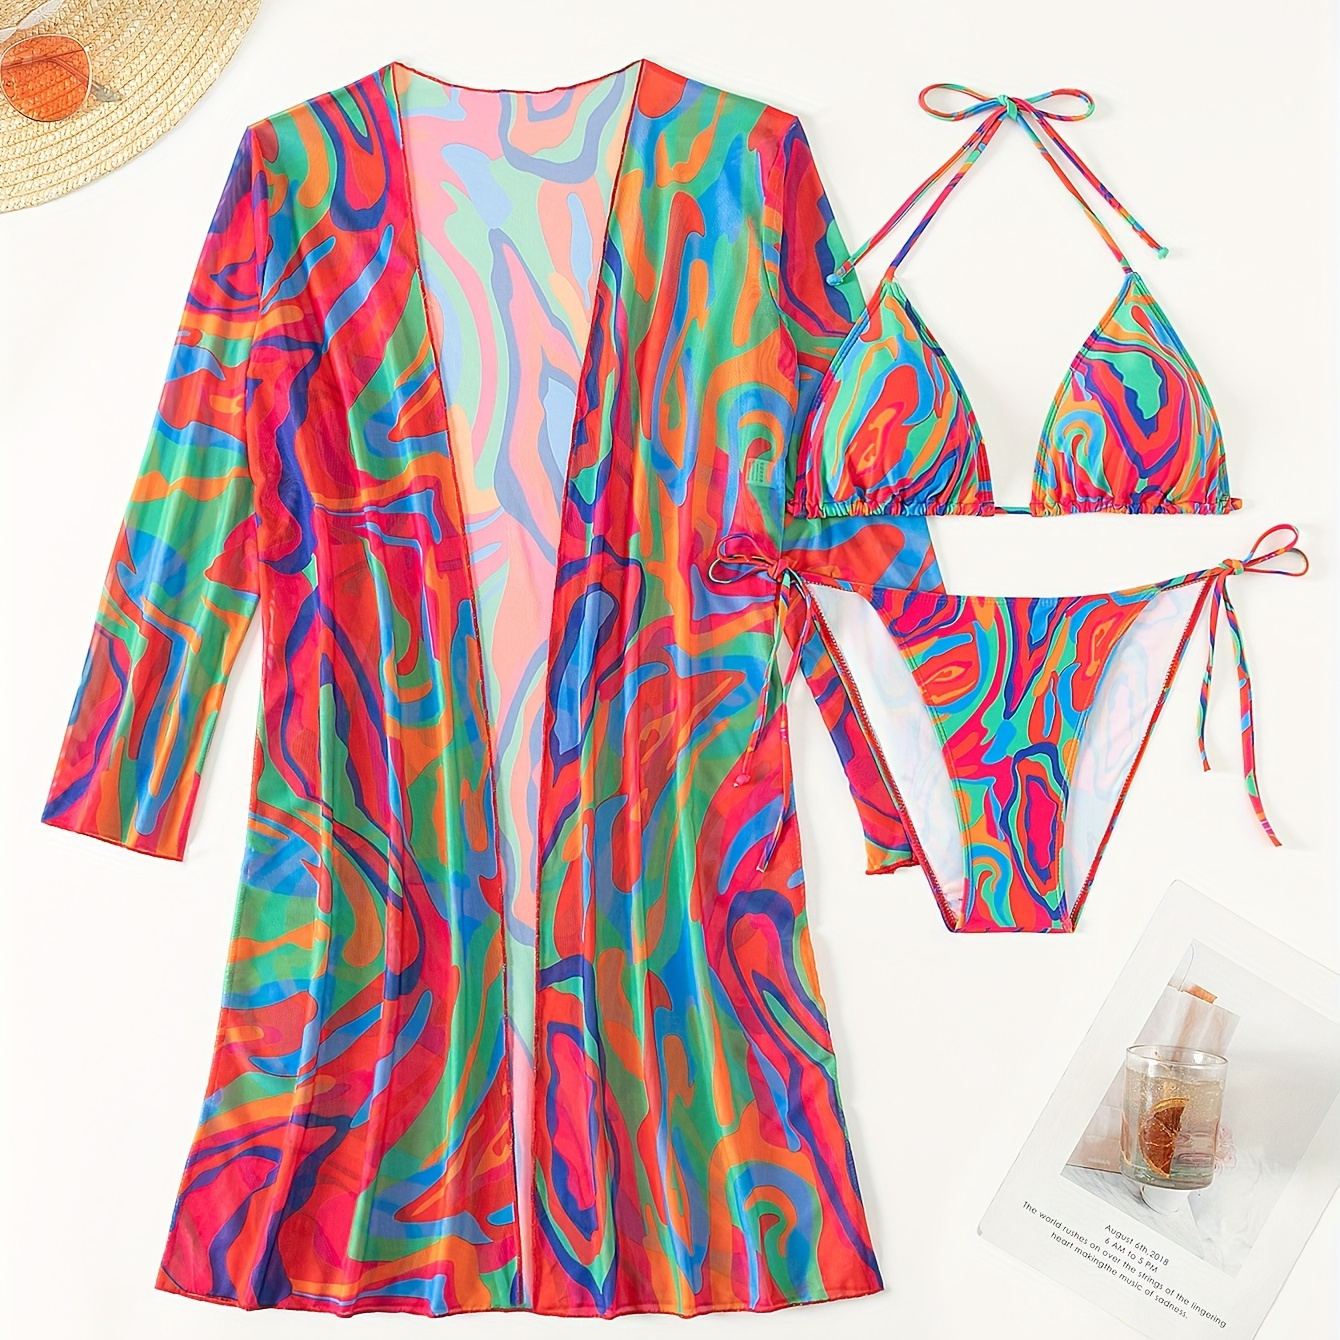 

Women's 3-piece Swimsuit Set, Stylish Sheer Mesh Bikini With Cover-up, Colorful Print, Beachwear For Summer Vacation